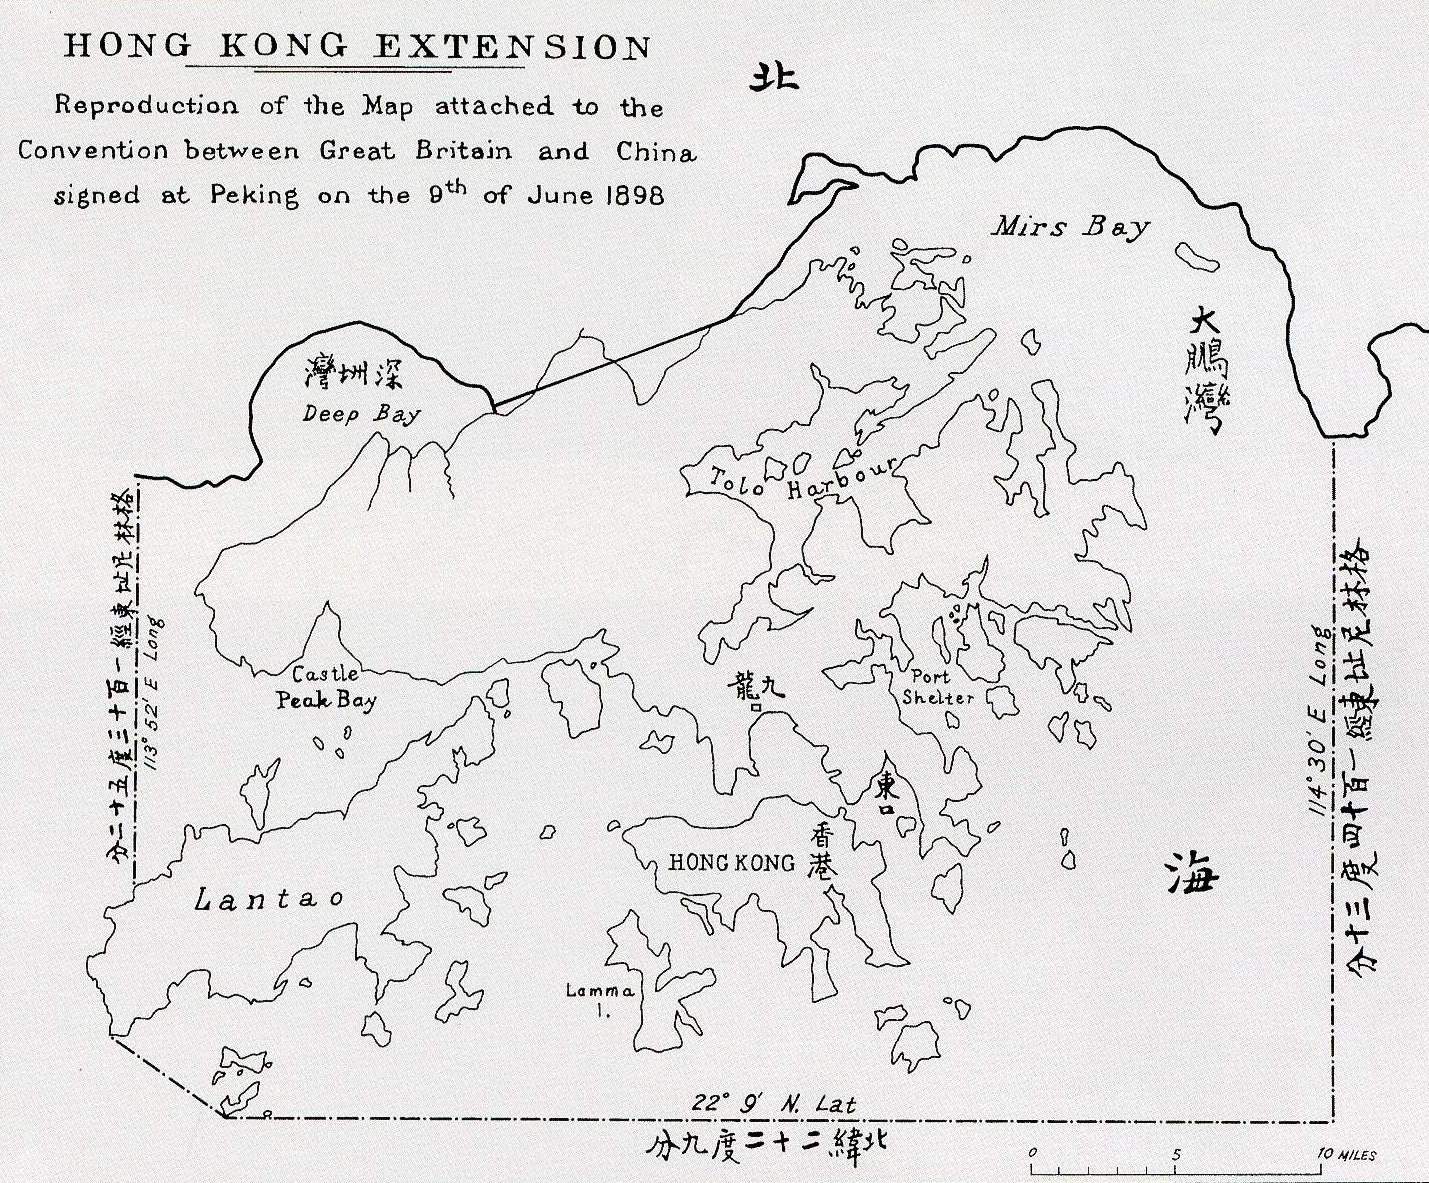 An 1898 map of Hong Kong and the 'new' territories on the peninsula that were leased to Britain.